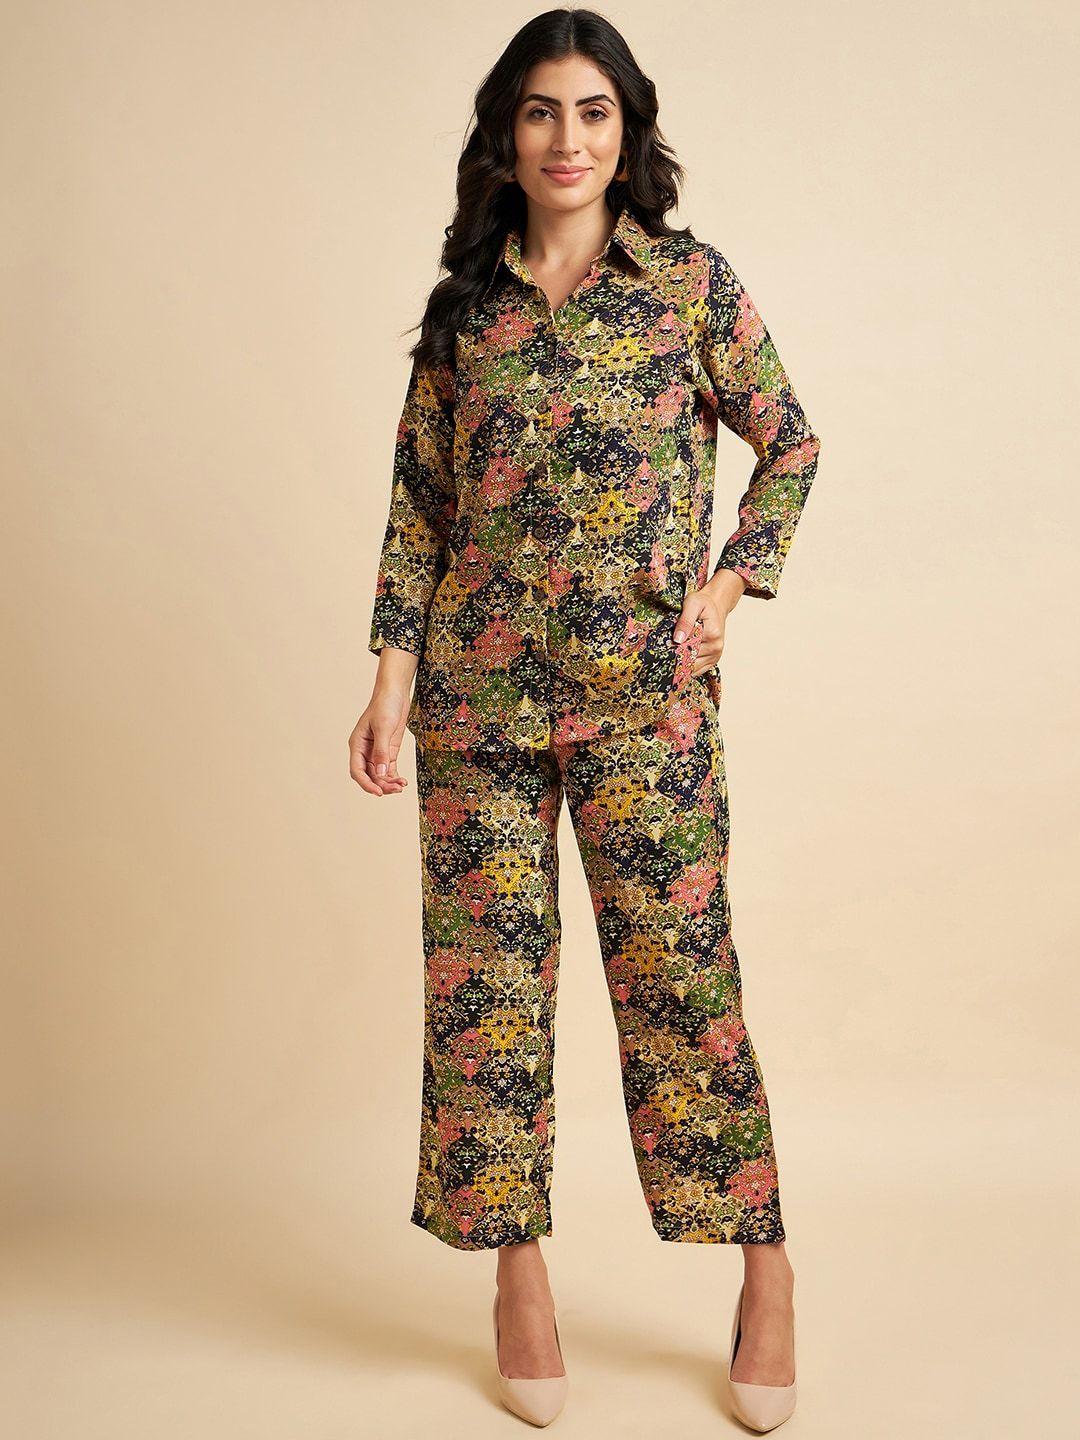 azira floral printed shirt & trousers co-ords